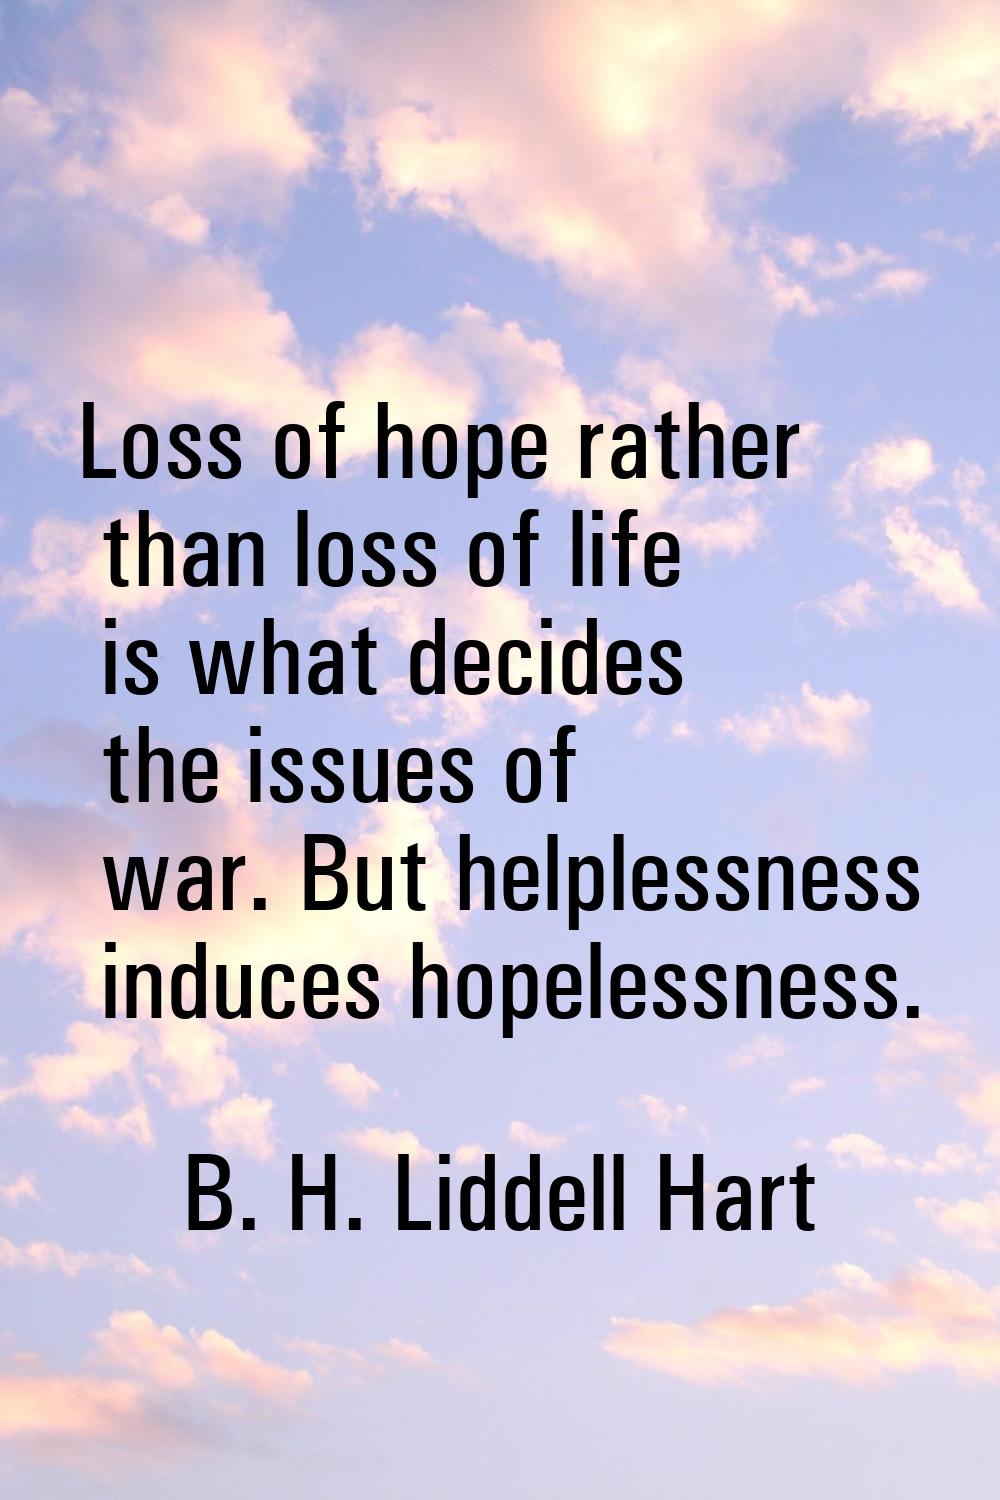 Loss of hope rather than loss of life is what decides the issues of war. But helplessness induces h